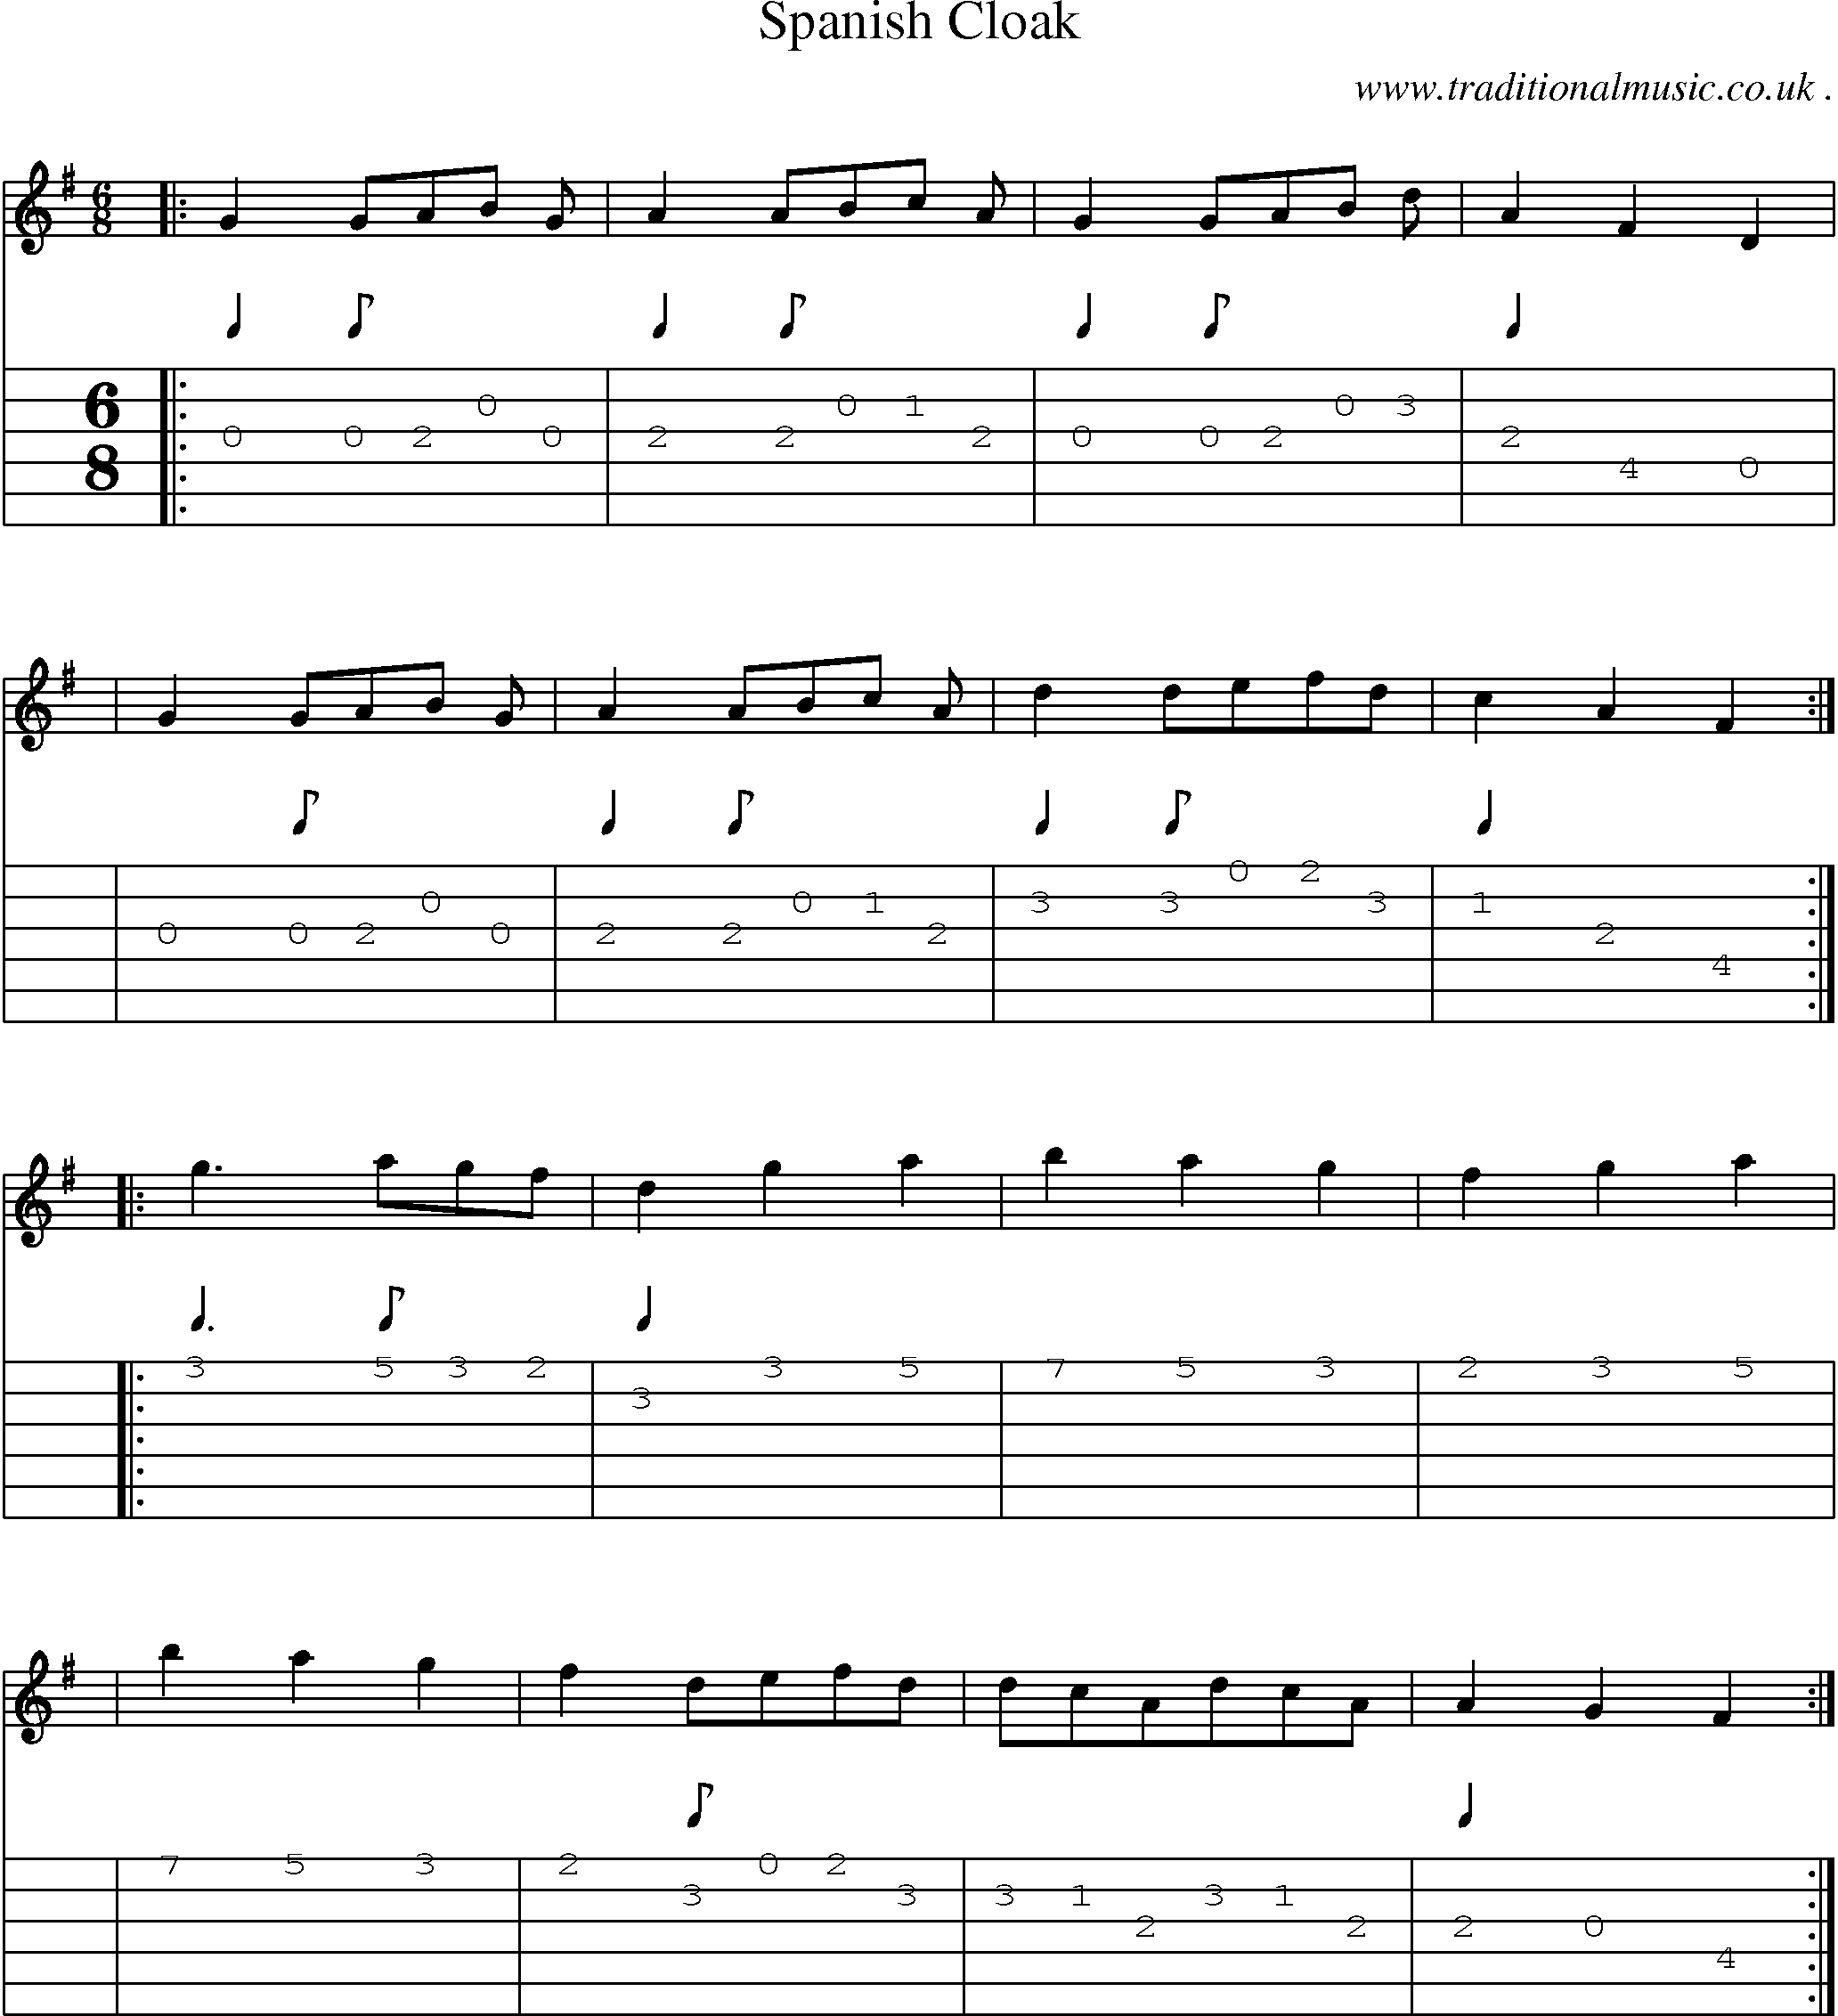 Sheet-Music and Guitar Tabs for Spanish Cloak